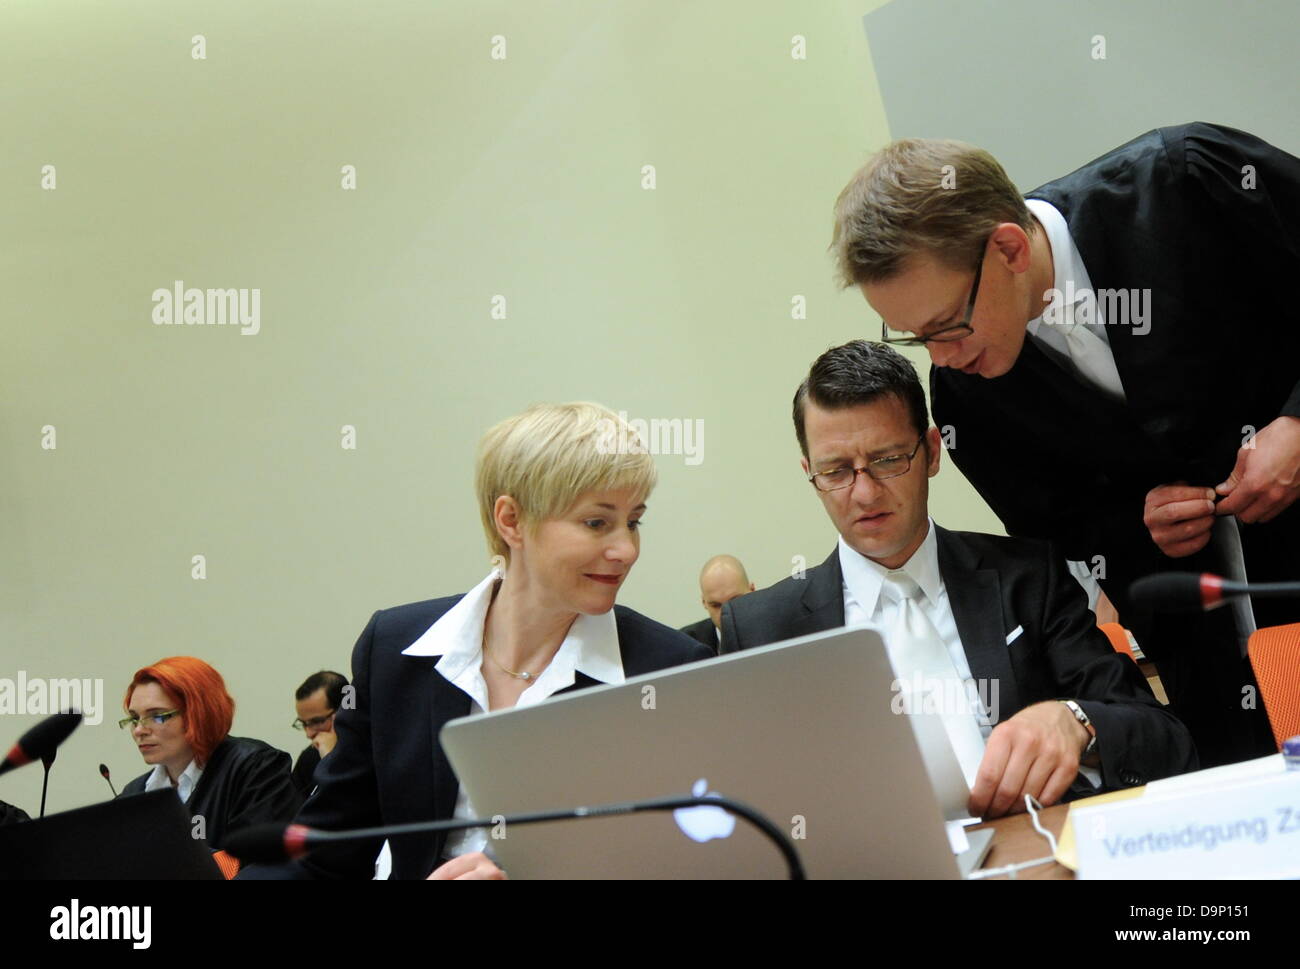 The lawyers of the defendant Zschaepe, (FRONT L-R) Anja Sturm,  Wolfgang Stahl and Wolfgang Heer, talk inside the court room in Munich, Germany, 24 June 2013. The trial of the murders and terror attacks of German terror cell 'National Socialist Underground' (NSU) continues at the Higher Regional Court in Munich. The court has called witnesses. Photo: Tobias Hase Stock Photo